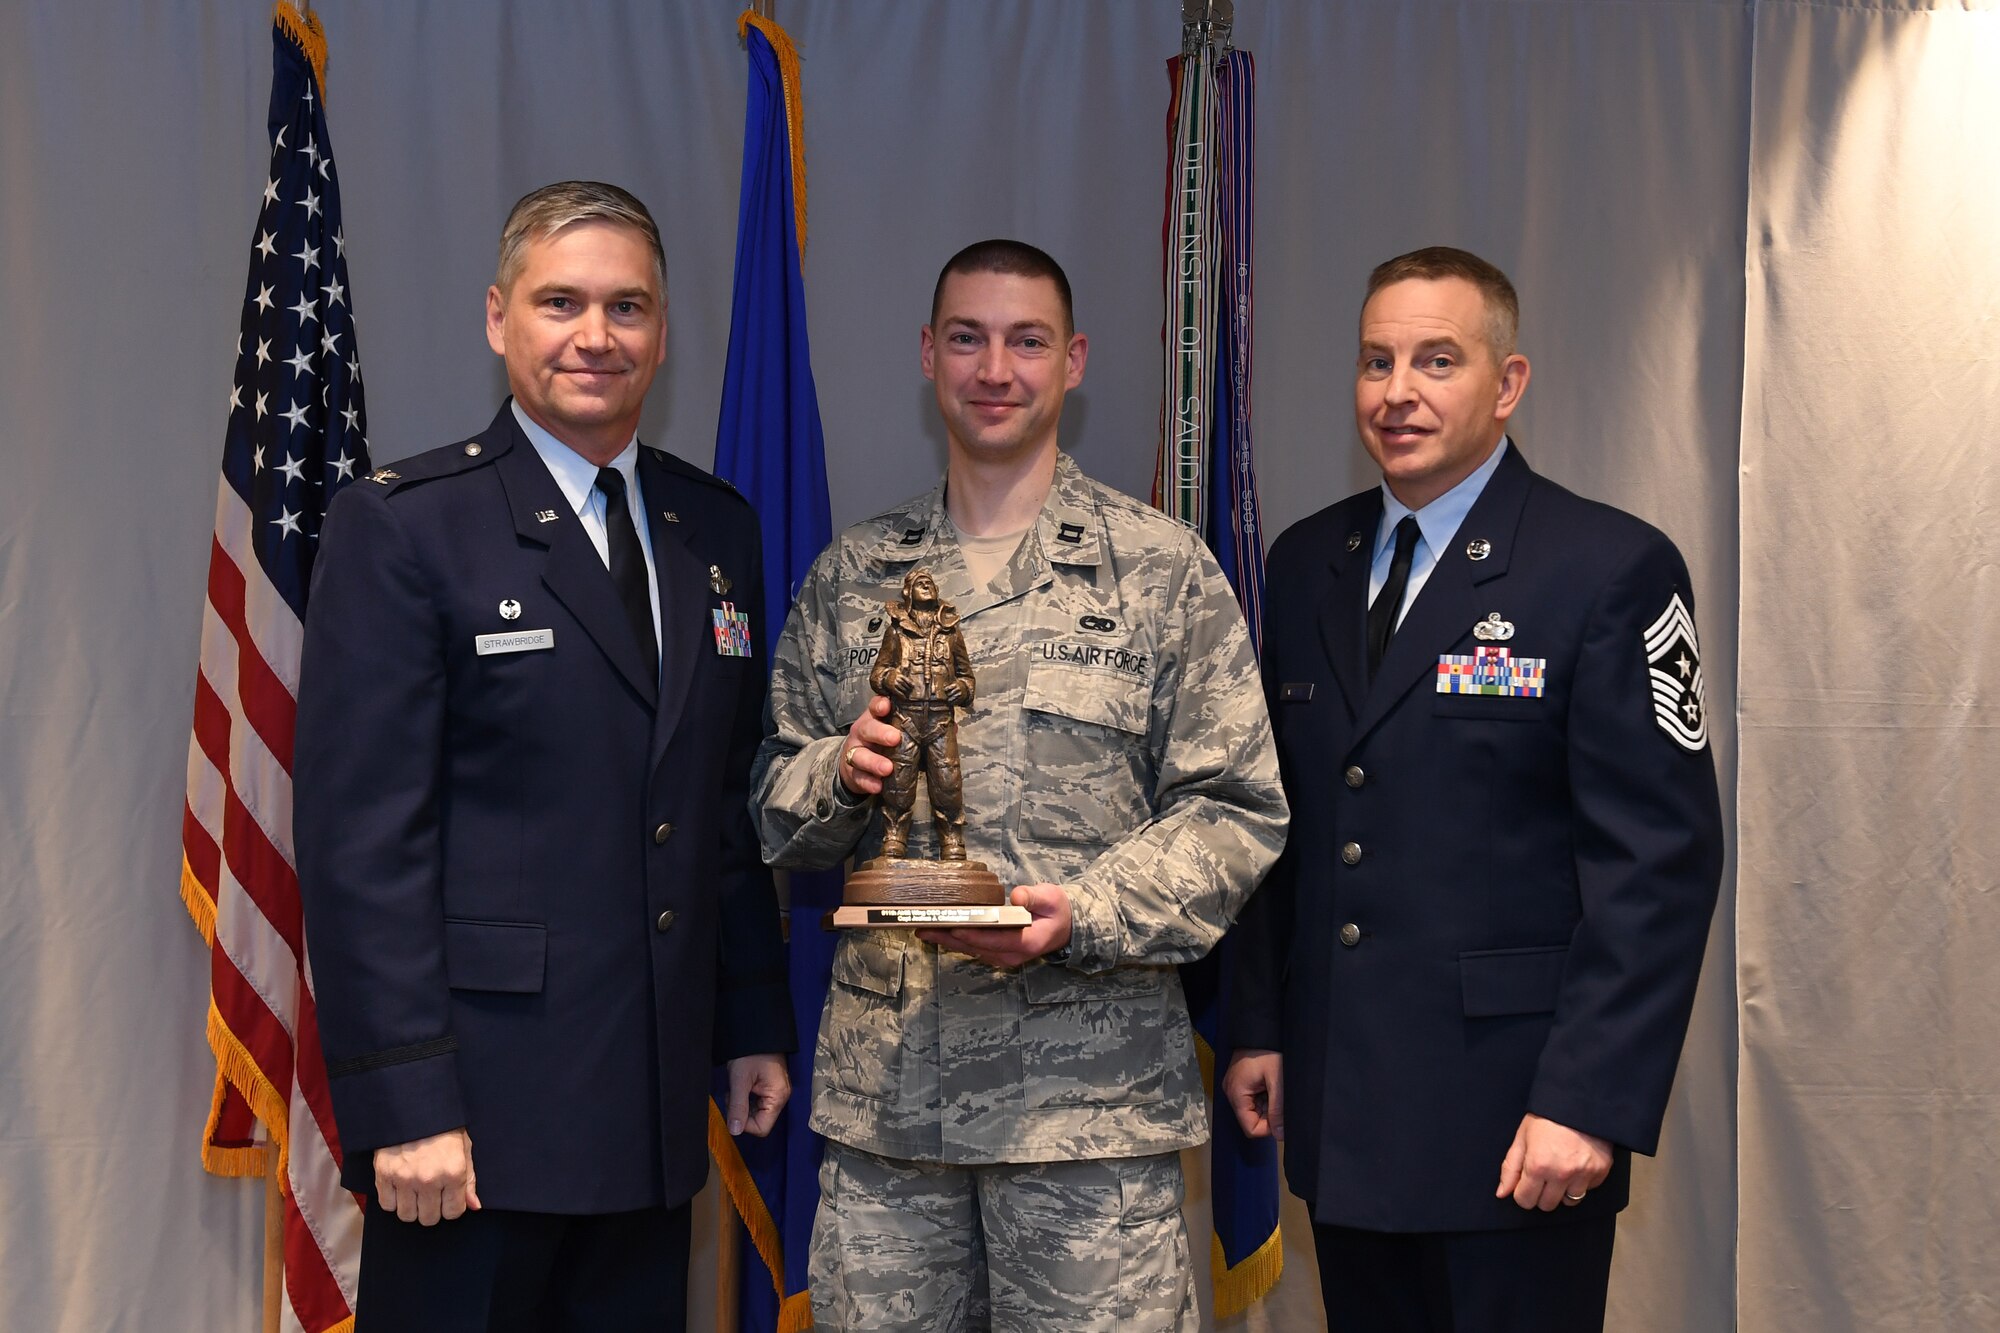 Captain Joshua Christopher, operations officer with the 911th Maintenance Squadron, is awarded 911th Airlift Wing Company Grade Officer of the Year by Col. Douglas N. Strawbridge, commander of the 911th AW, and Chief Master Sgt. Christopher D. Neitzel, command chief of the 911th AW, during the 911th AW Annual Award Ceremony at the Pittsburgh International Airport Air Reserve Station, Pennsylvania, March 2, 2019. The 2018 awards ceremony recognized Airmen who went above and beyond in their service for the year 2018. (U.S. Air Force photo by Senior Airman Grace Thomson)